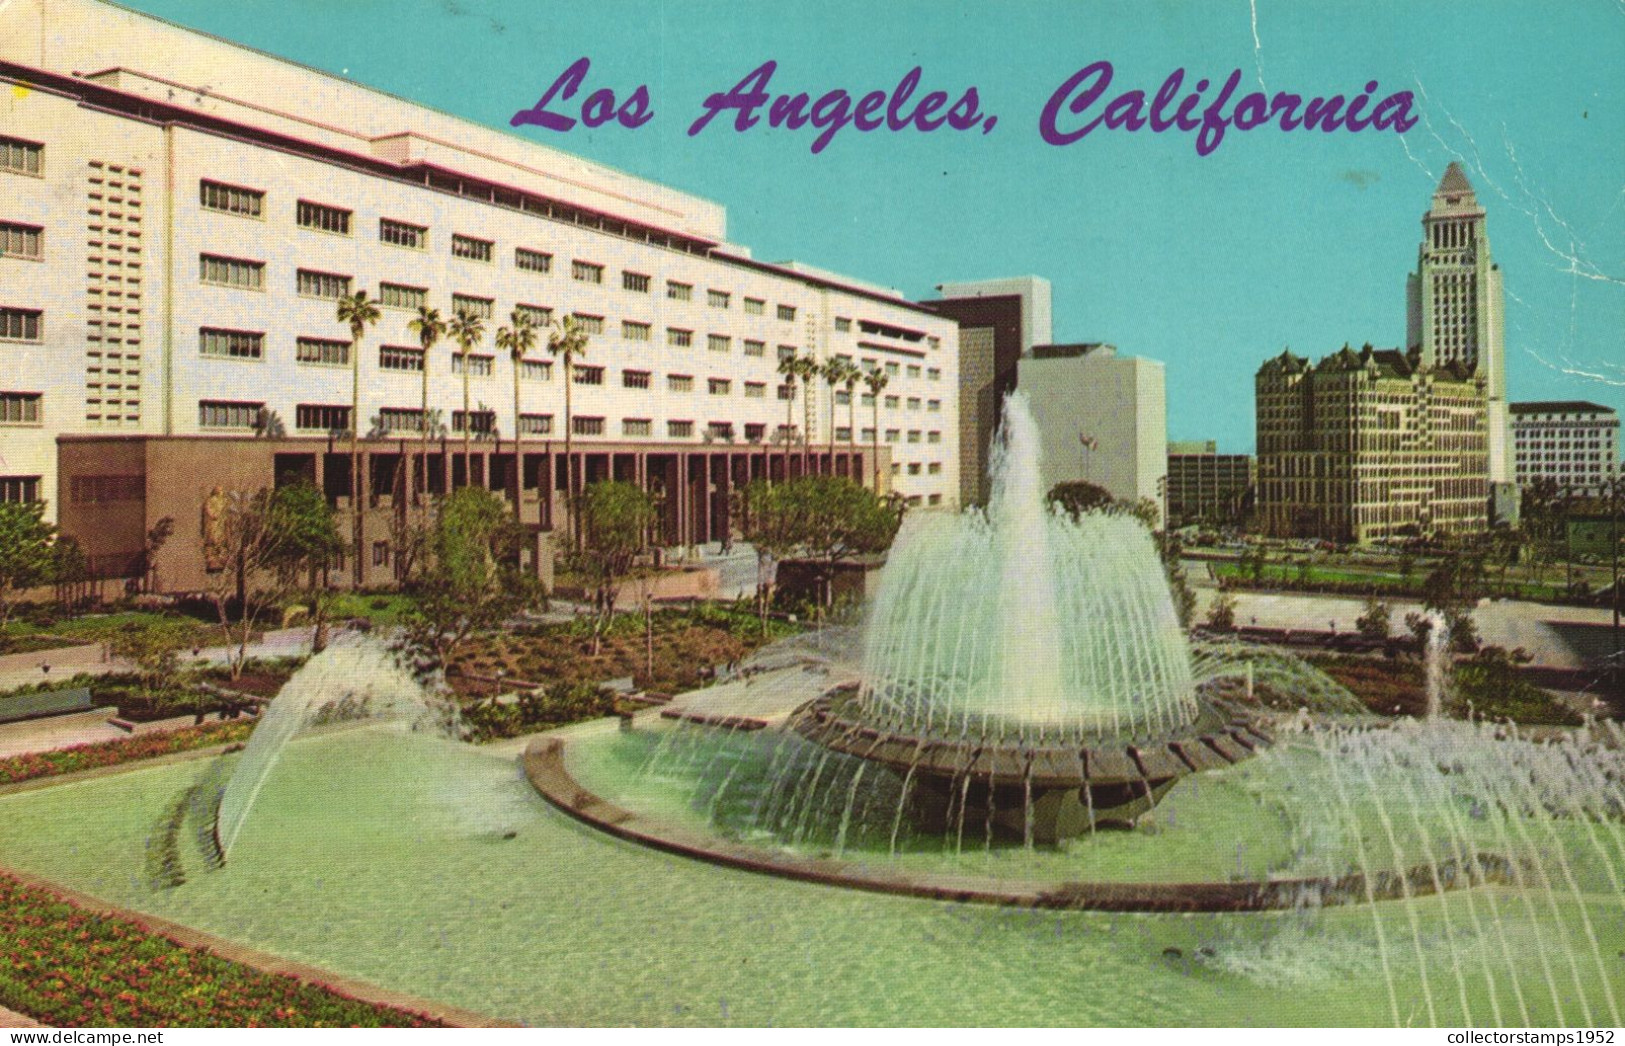 LOS ANGELES, CALIFORNIA, ARCHITECTURE, FOUNTAIN, PARK, UNITED STATES, POSTCARD - Los Angeles